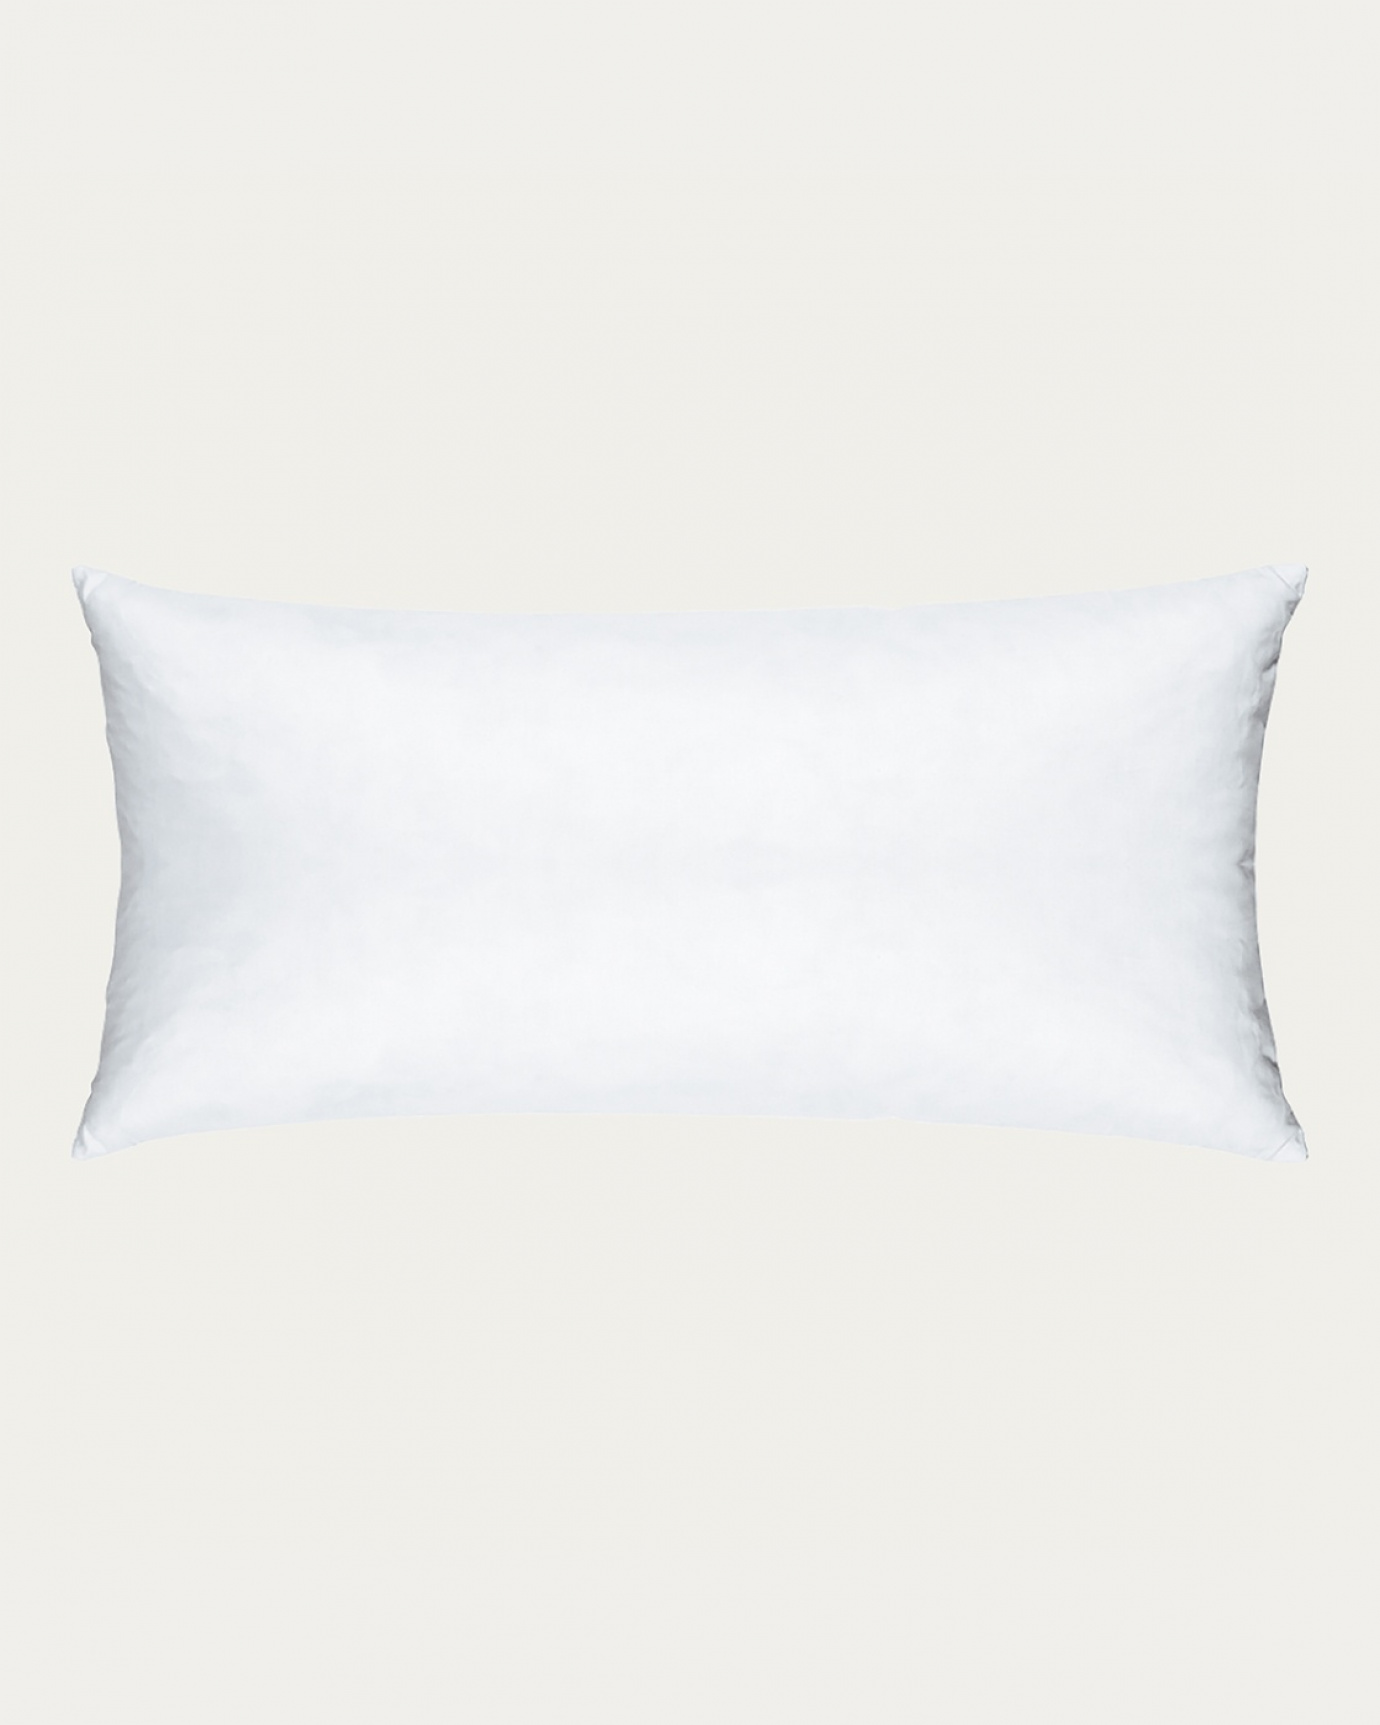 Product image white FEATHER cushion insert made of cotton with feather filling from LINUM DESIGN. Size 35x70 cm.